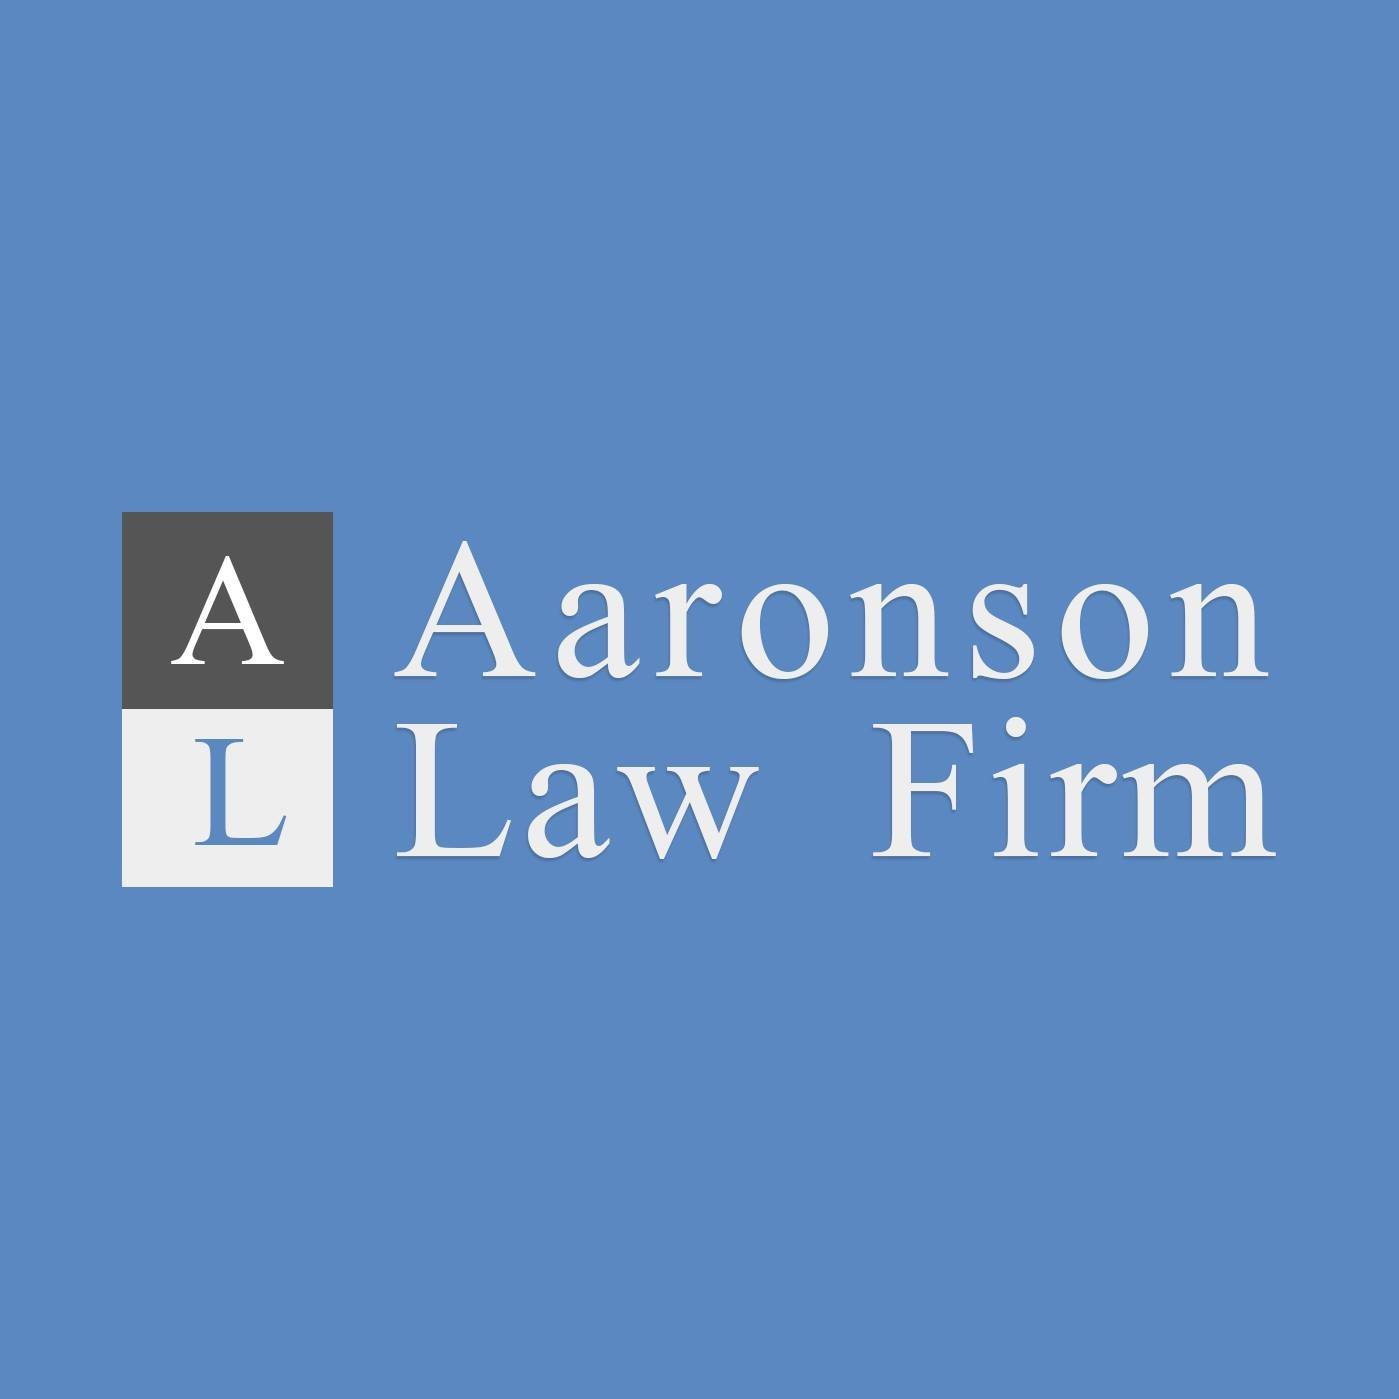 Business logo of Aaronson Law Firm